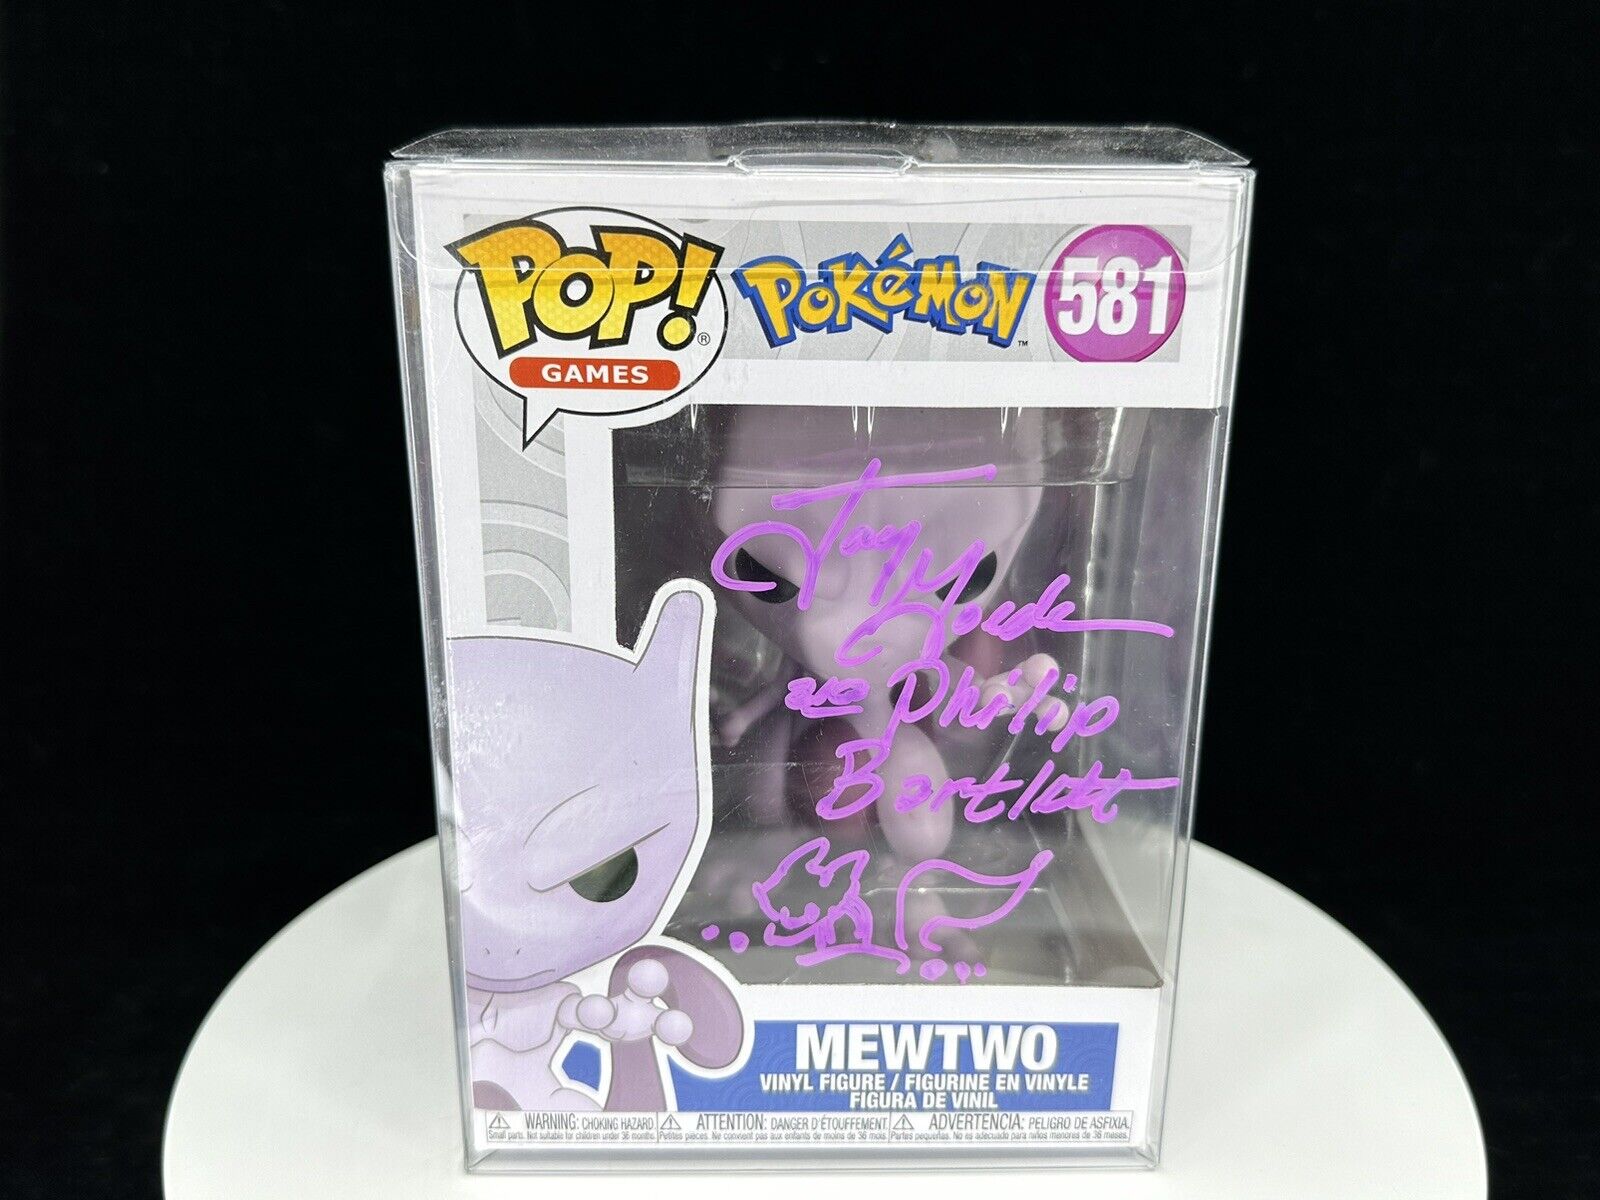 Jay Goede Philip Bartlett Signed Sketched Mewtwo Funko Pop 581 Pokemon